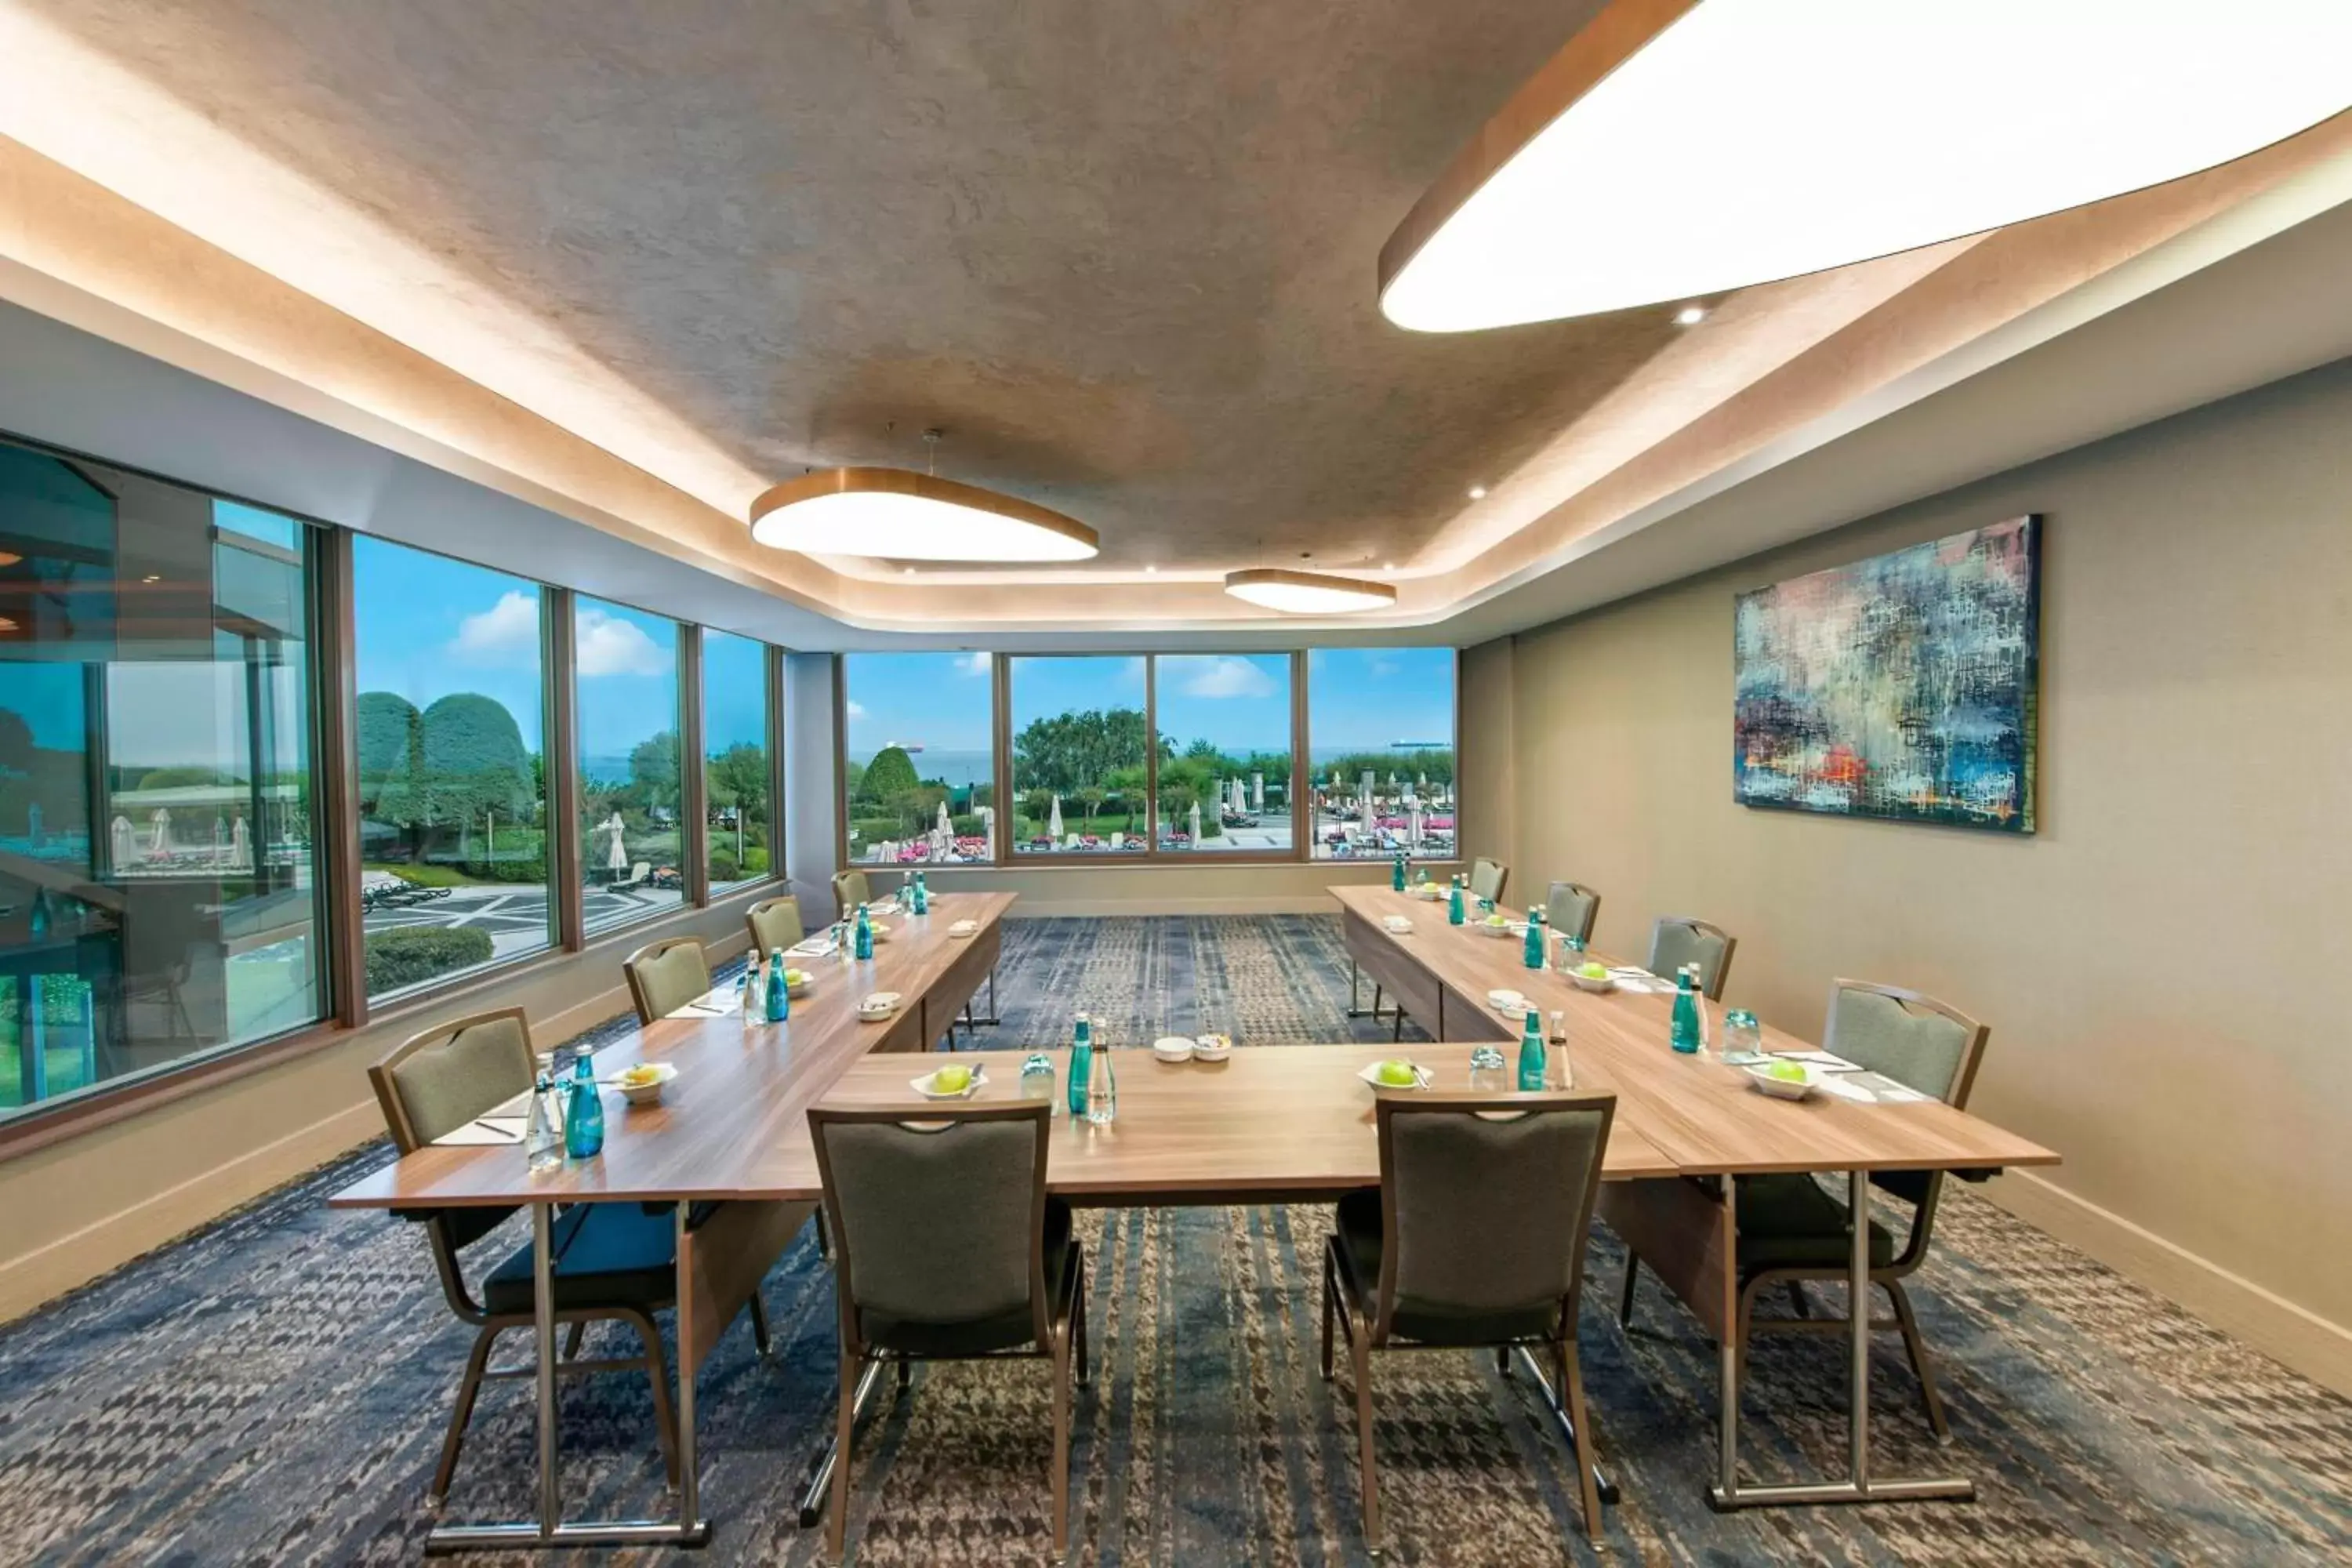 Meeting/conference room in Renaissance Polat Istanbul Hotel